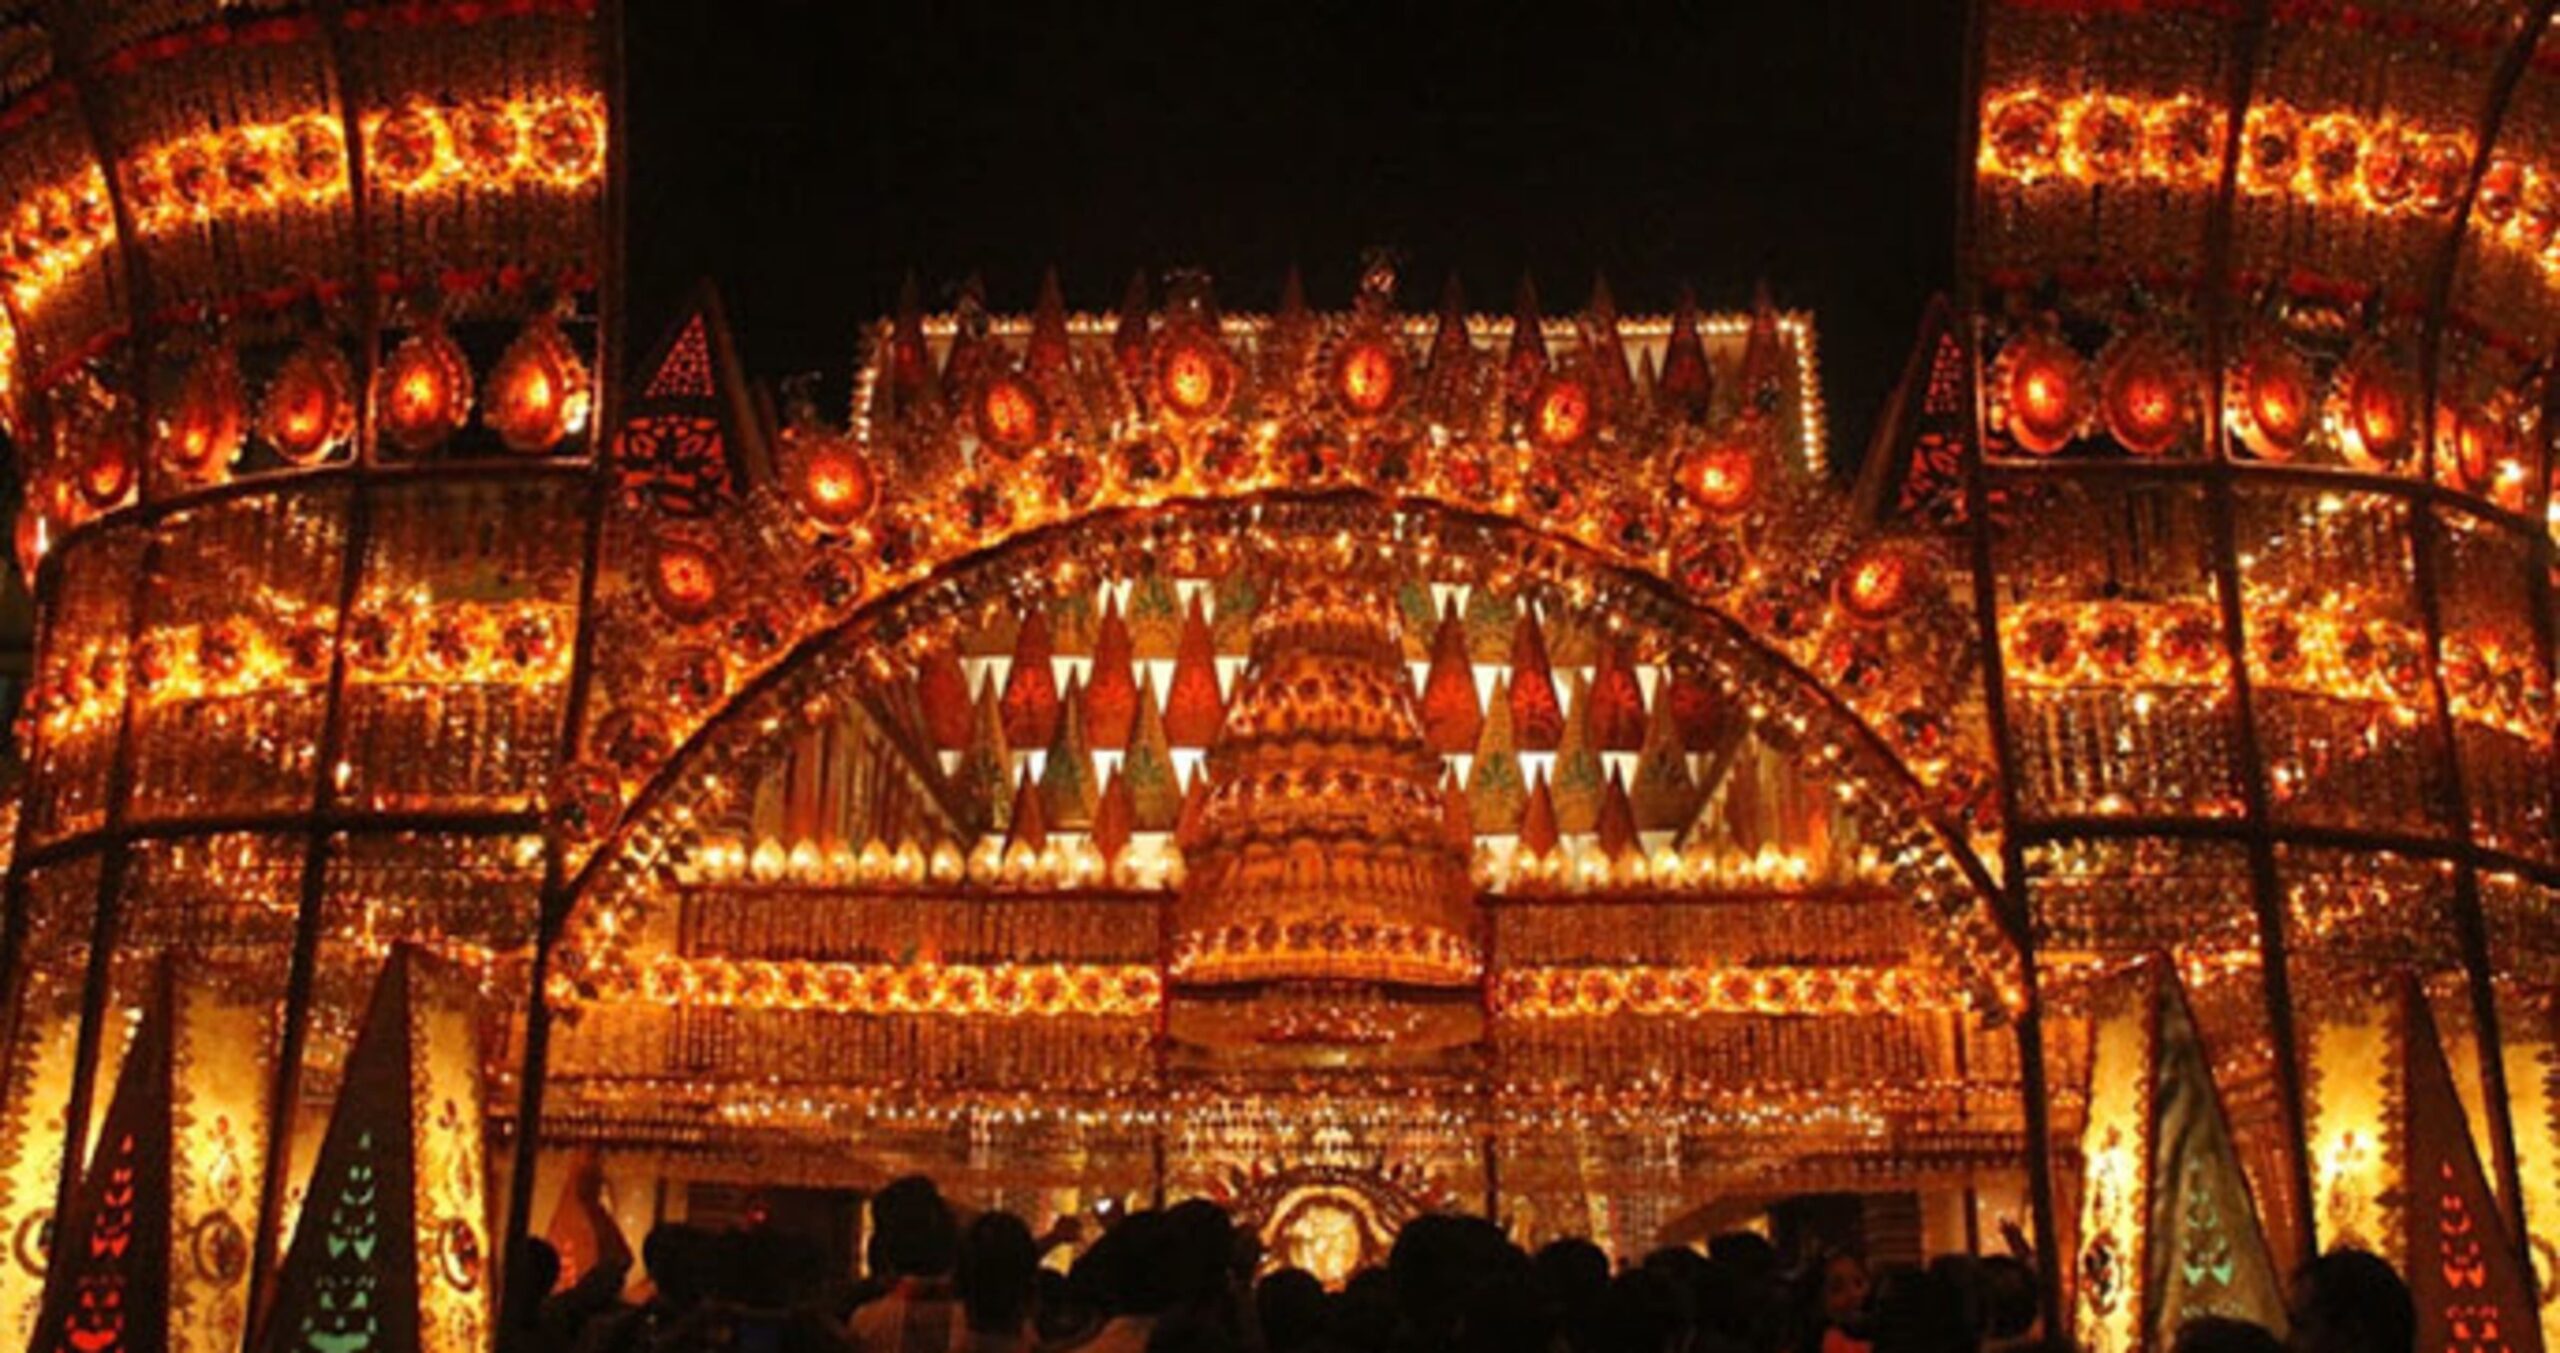 It’s not a Palace. It’s a magnificently illuminated Pandal, a temporary structure created for Durga Puja | PC - tourmyindia.com